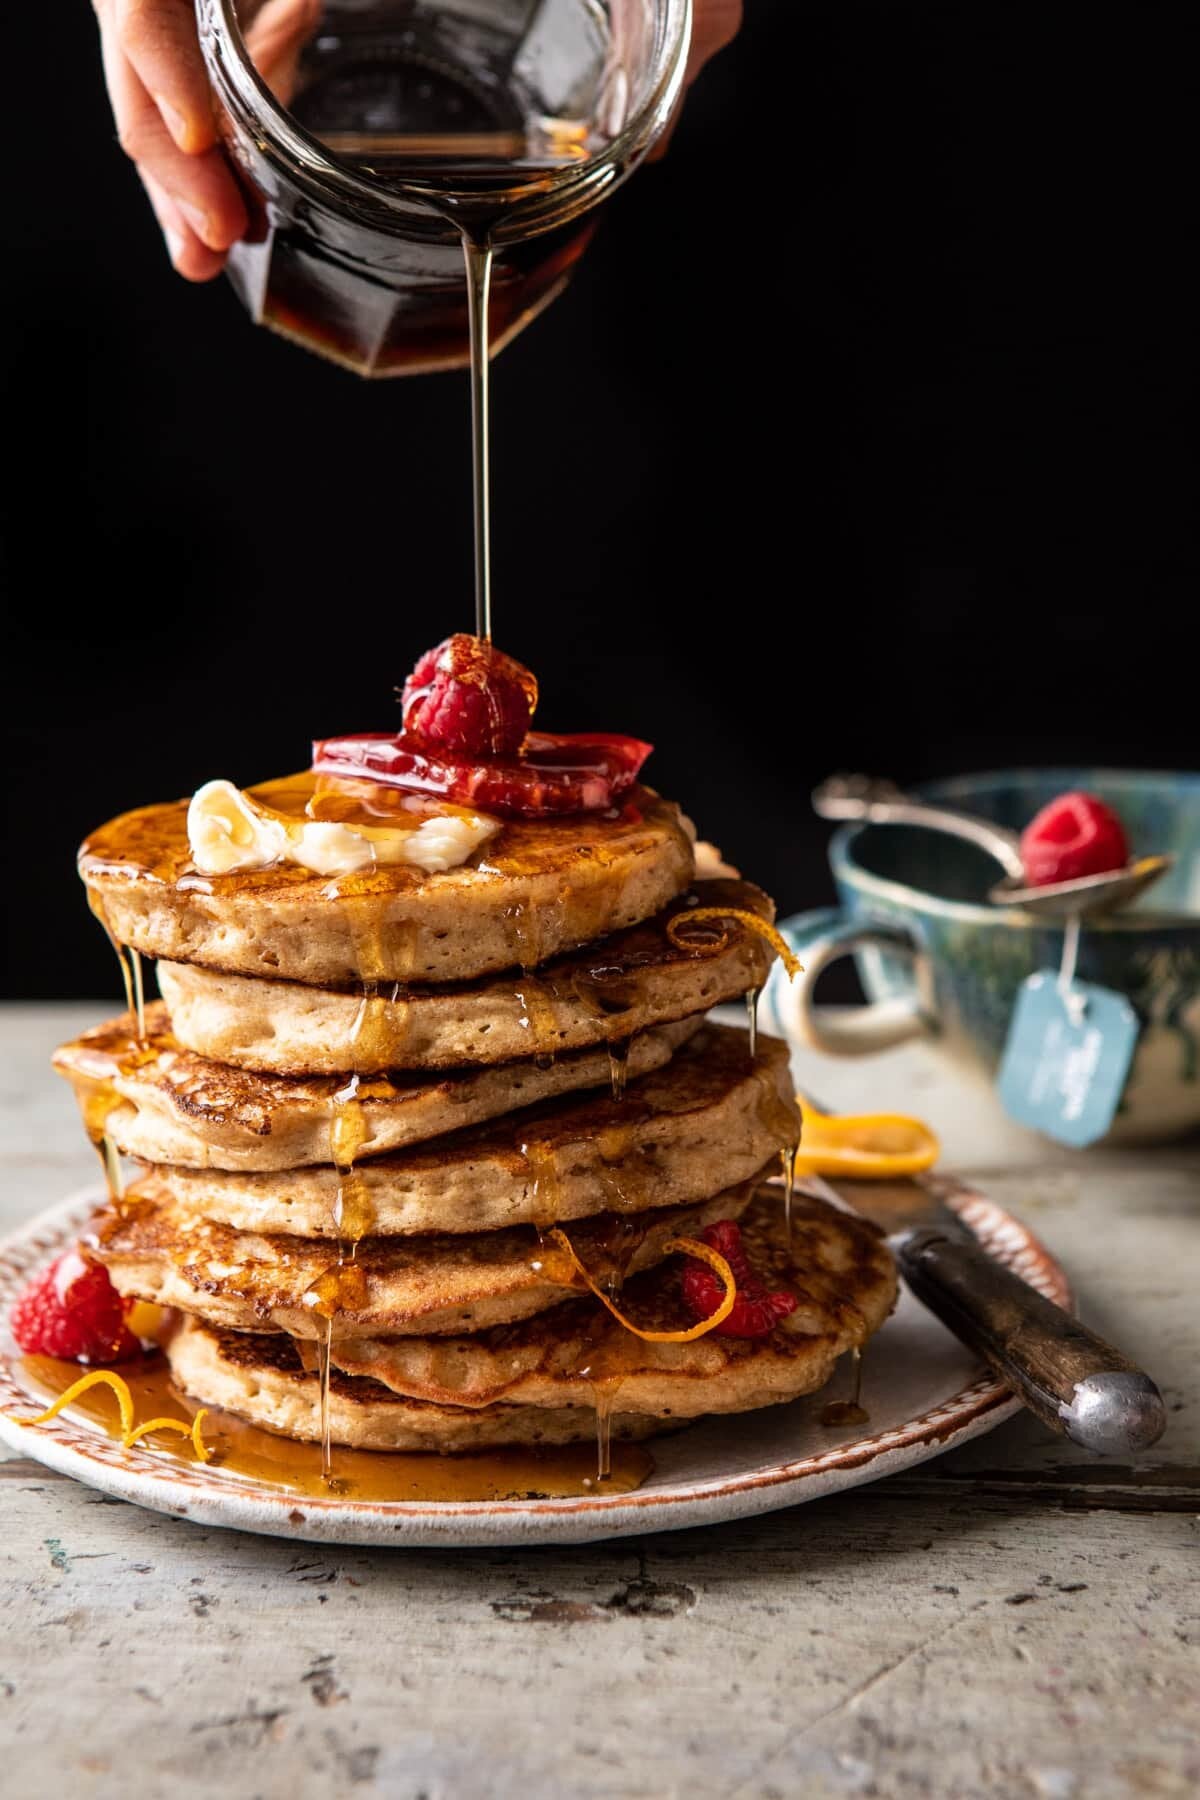 Earl Grey Lemon Ricotta Pancakes with Salted Maple Butter.